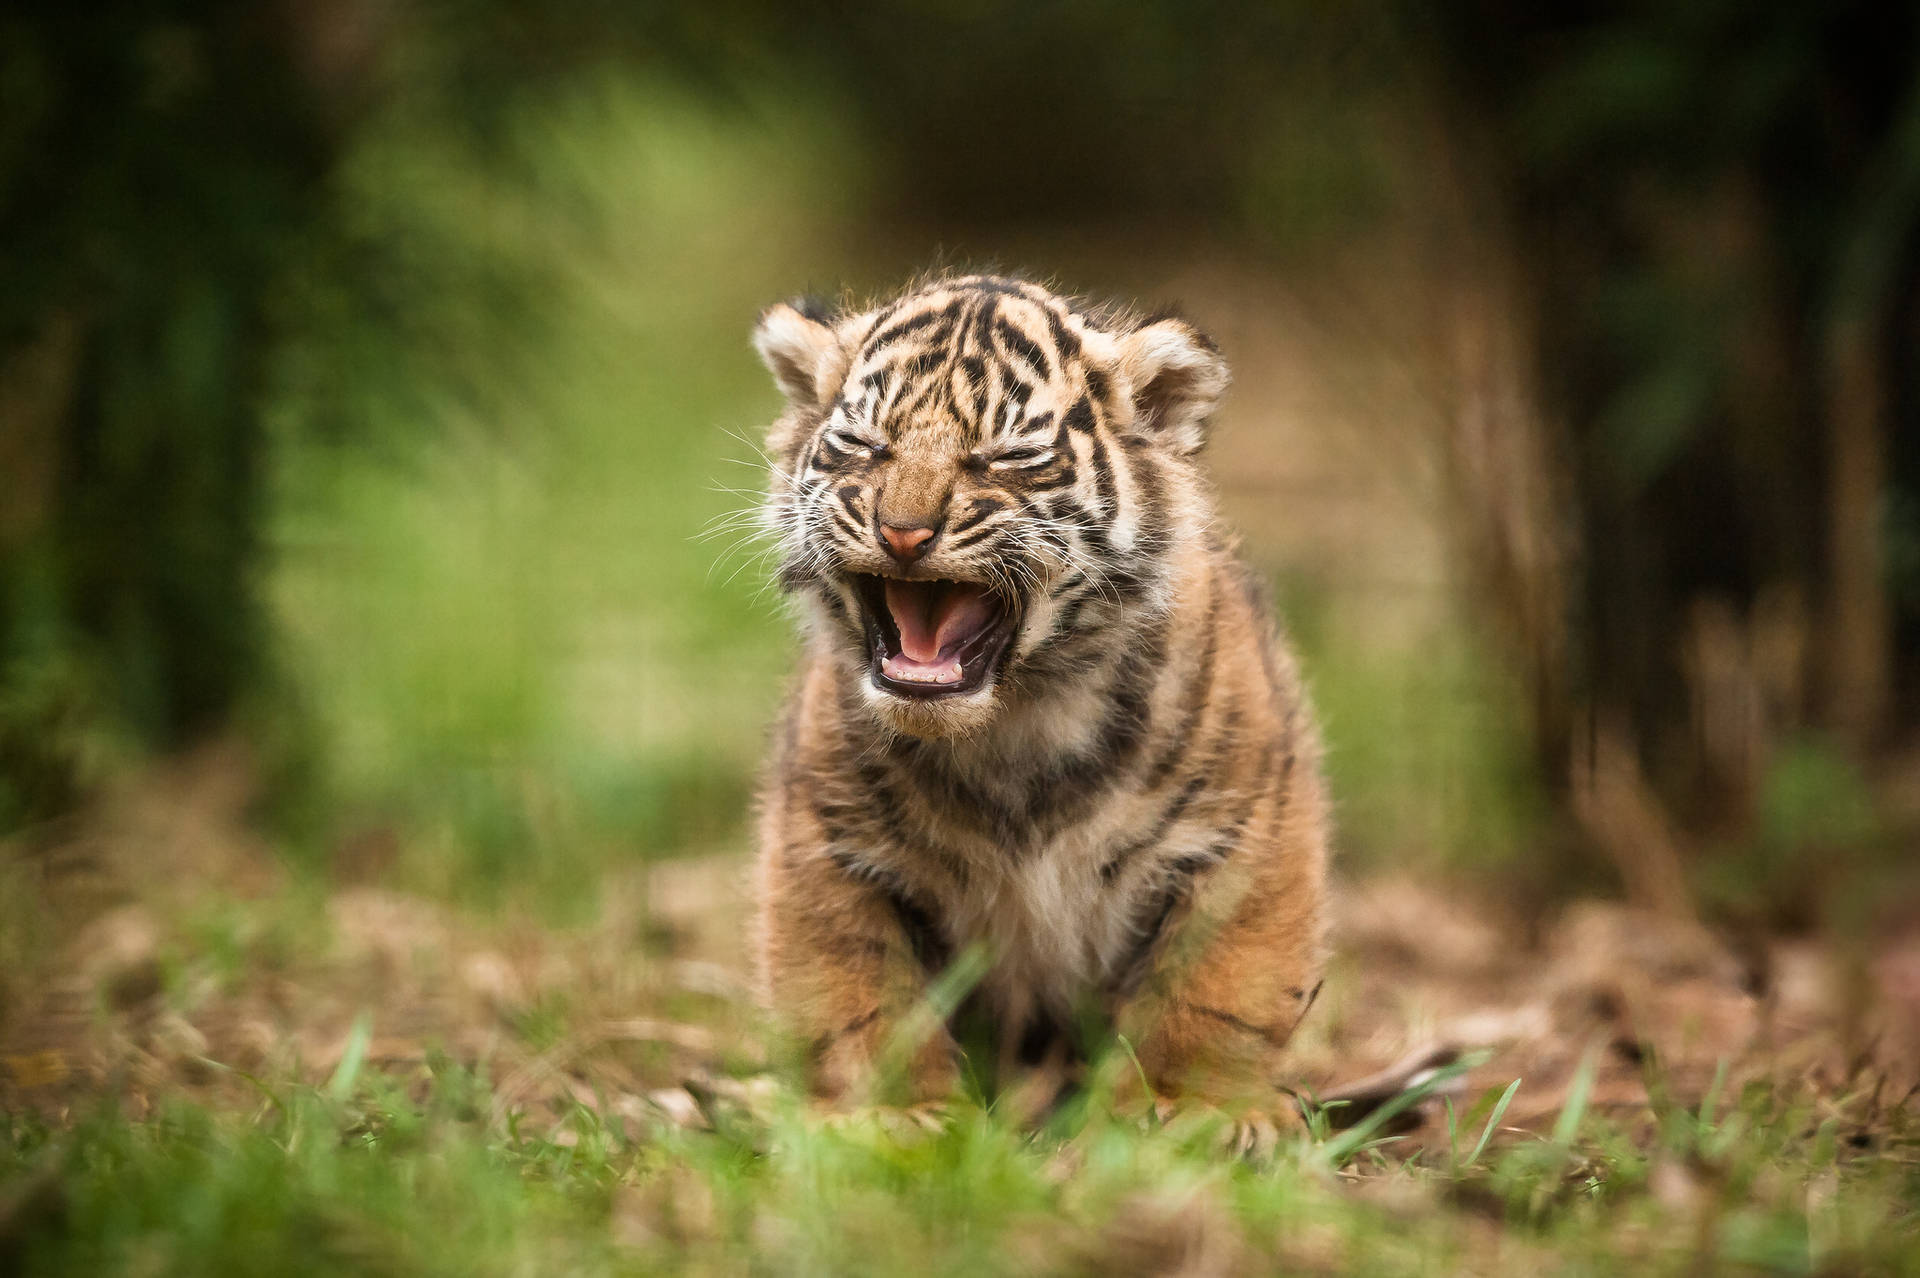 A Tiger Cub Cries In The Arms Of Its Mother Background